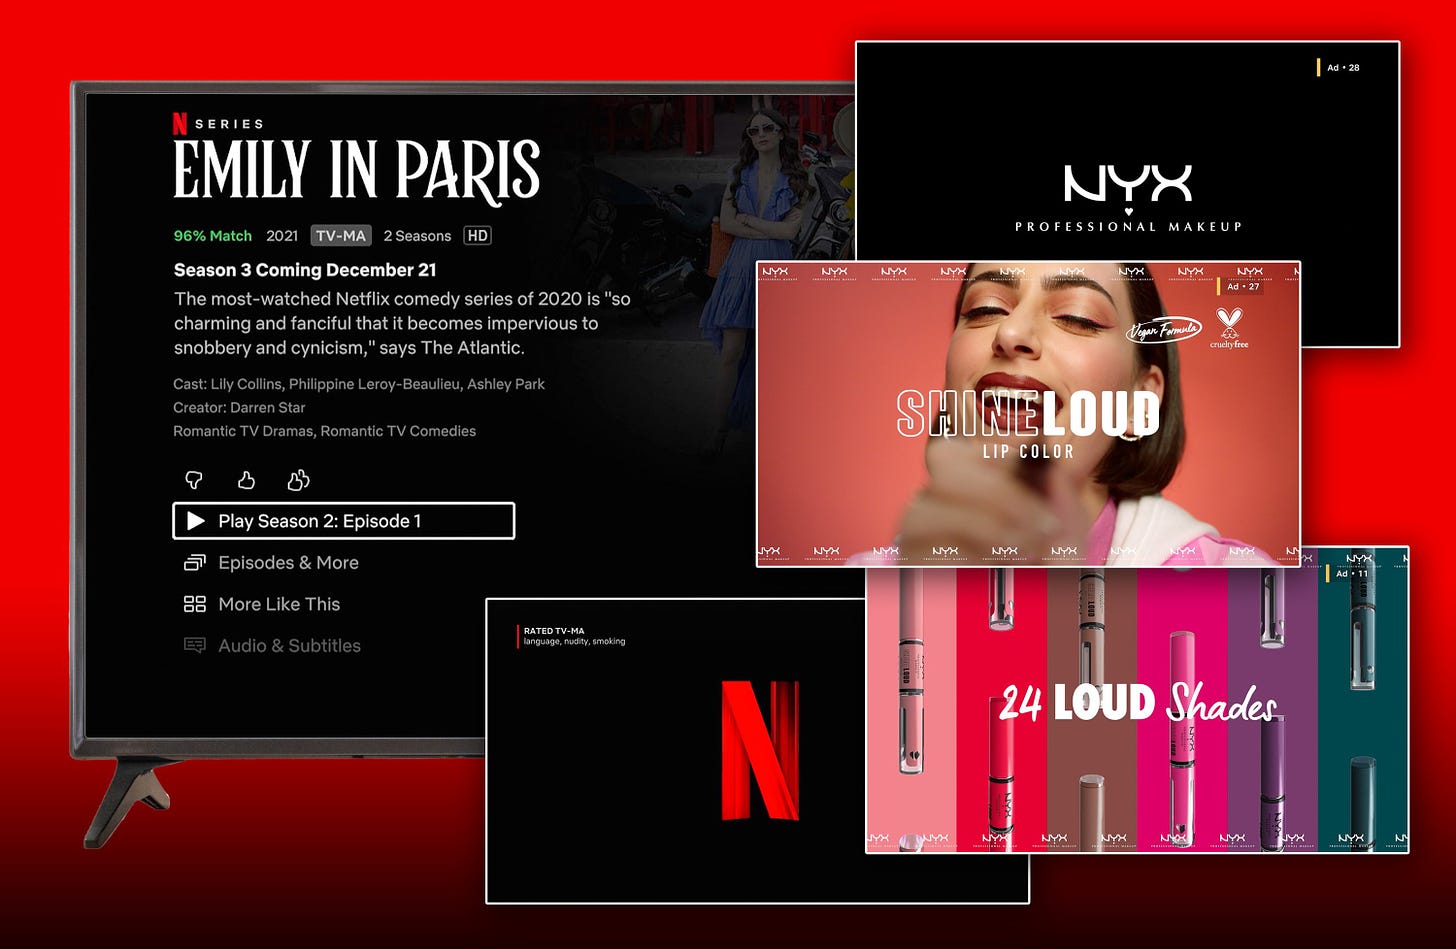 Netflix reveals ad plan price, Nielsen partnership and more 'Basic with Ads'  details | Ad Age